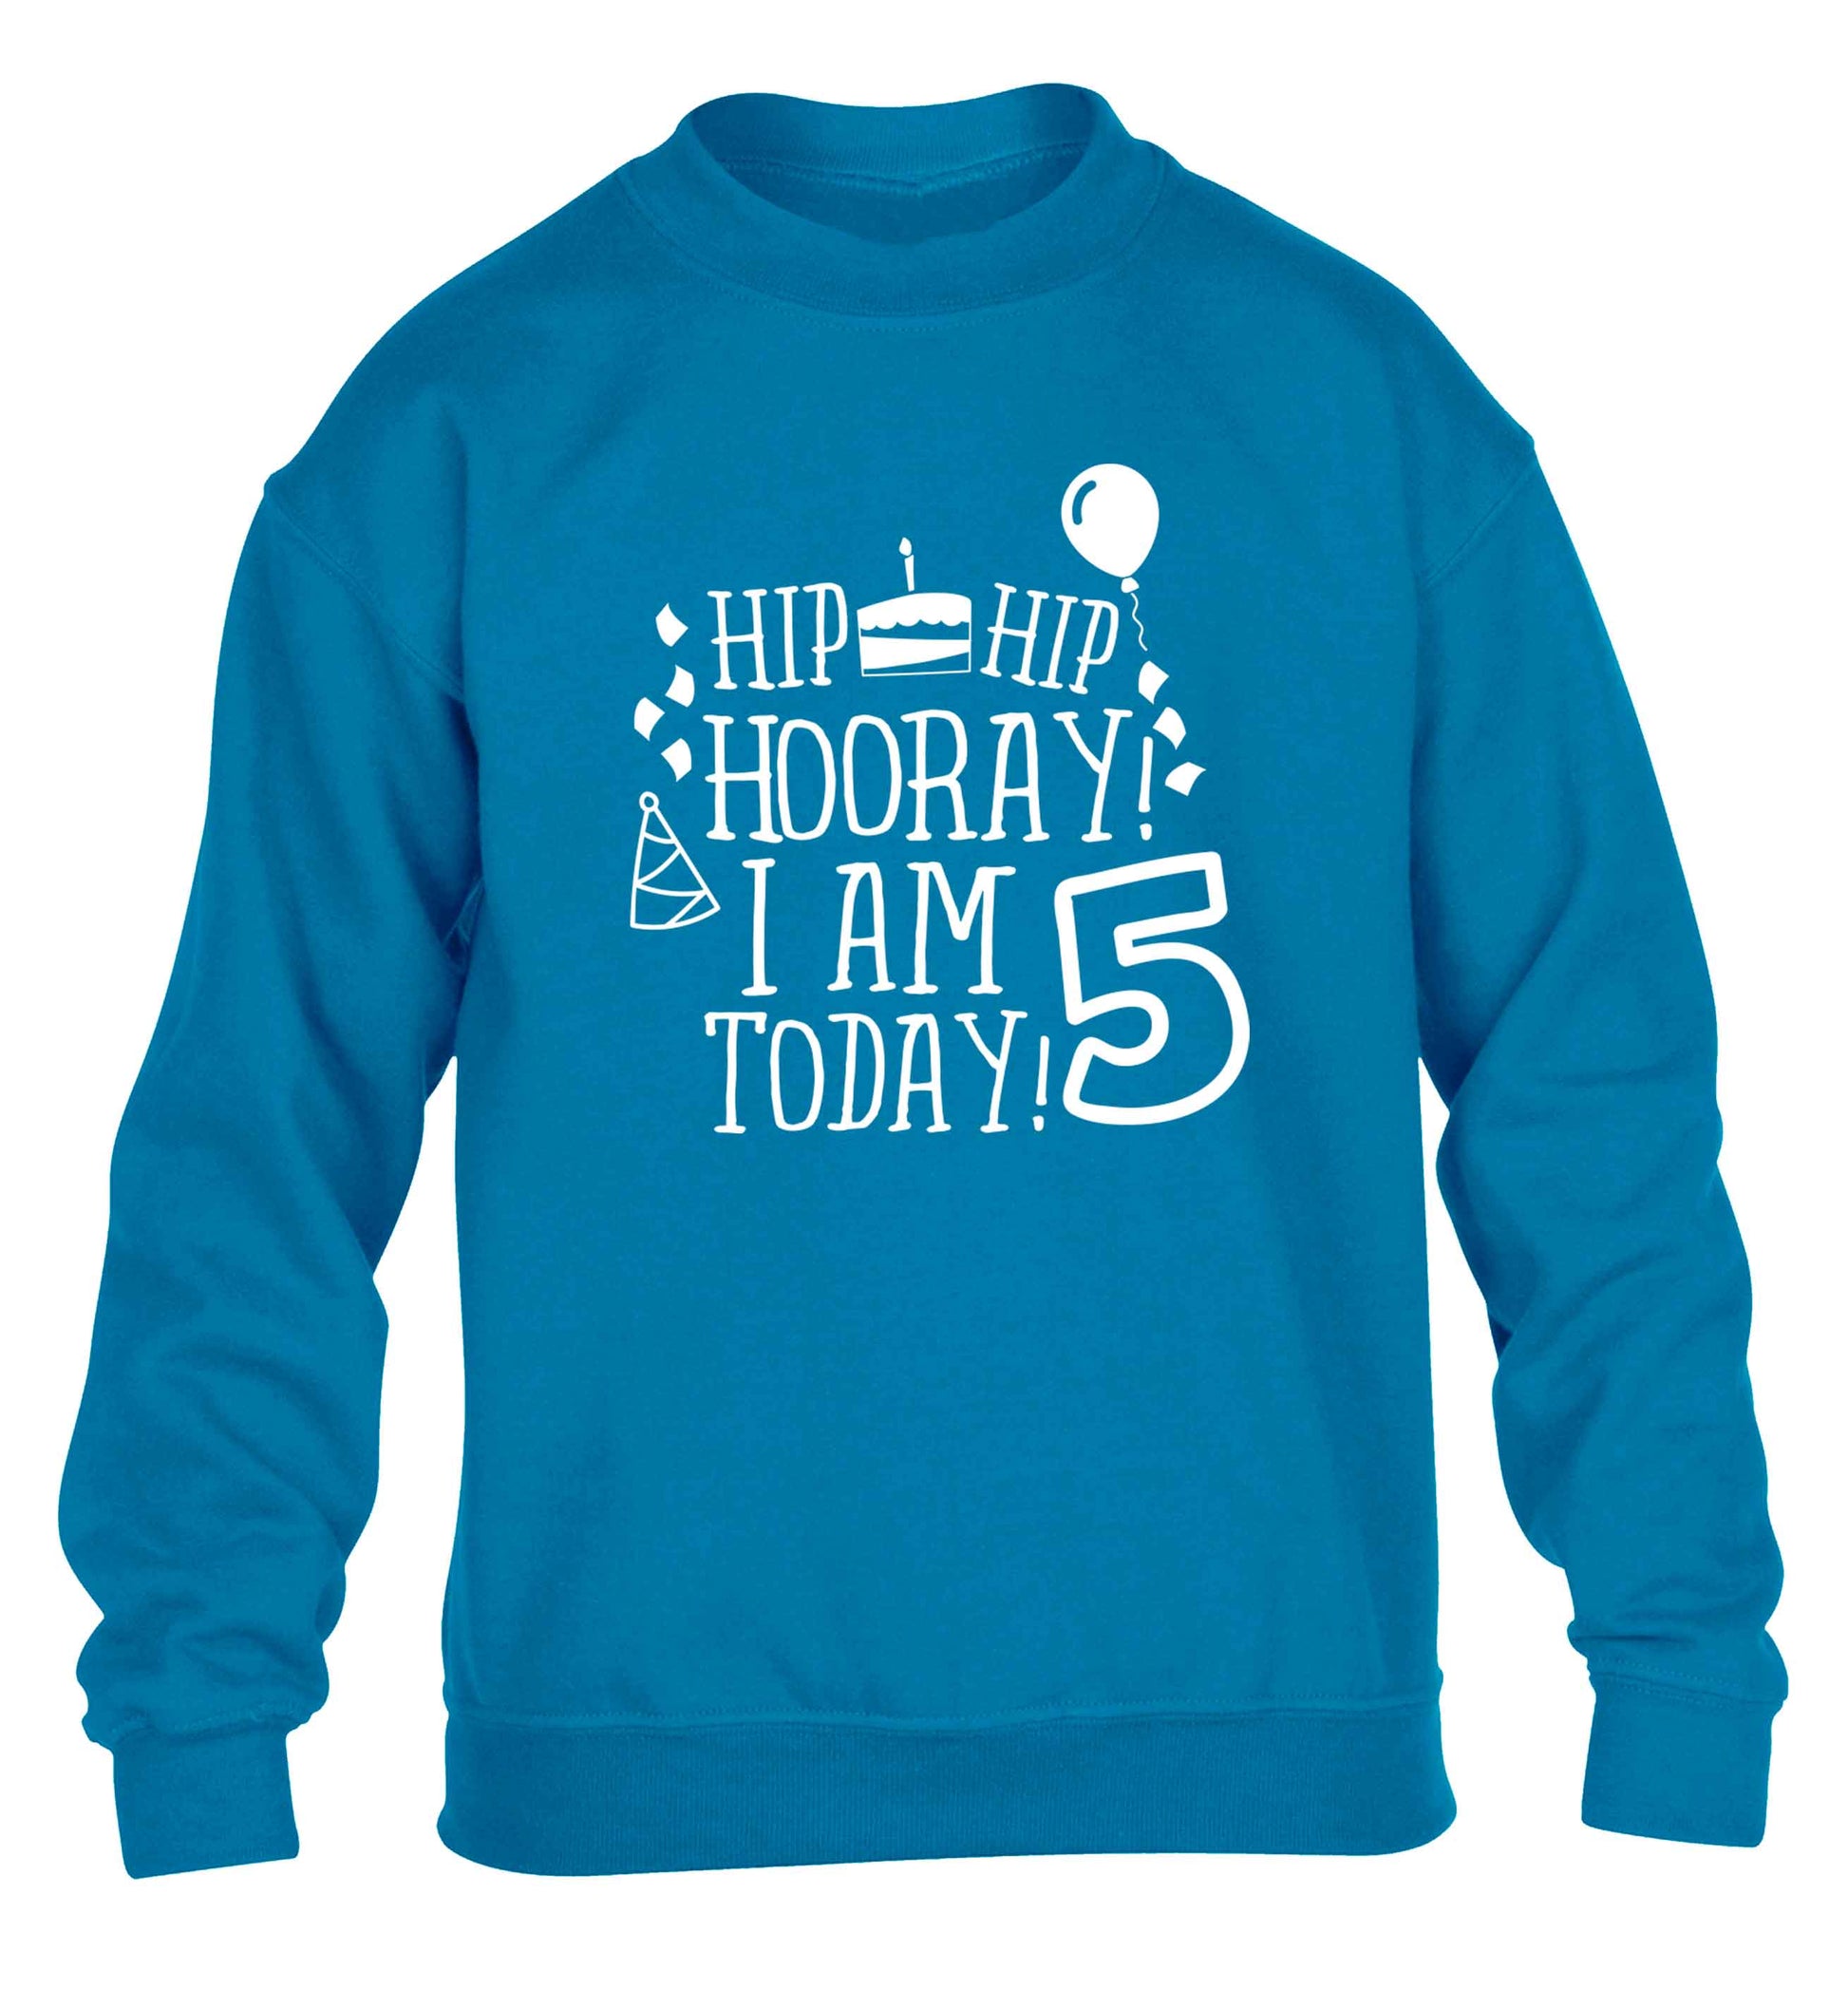 Hip hip hooray I am five today! children's blue sweater 12-13 Years